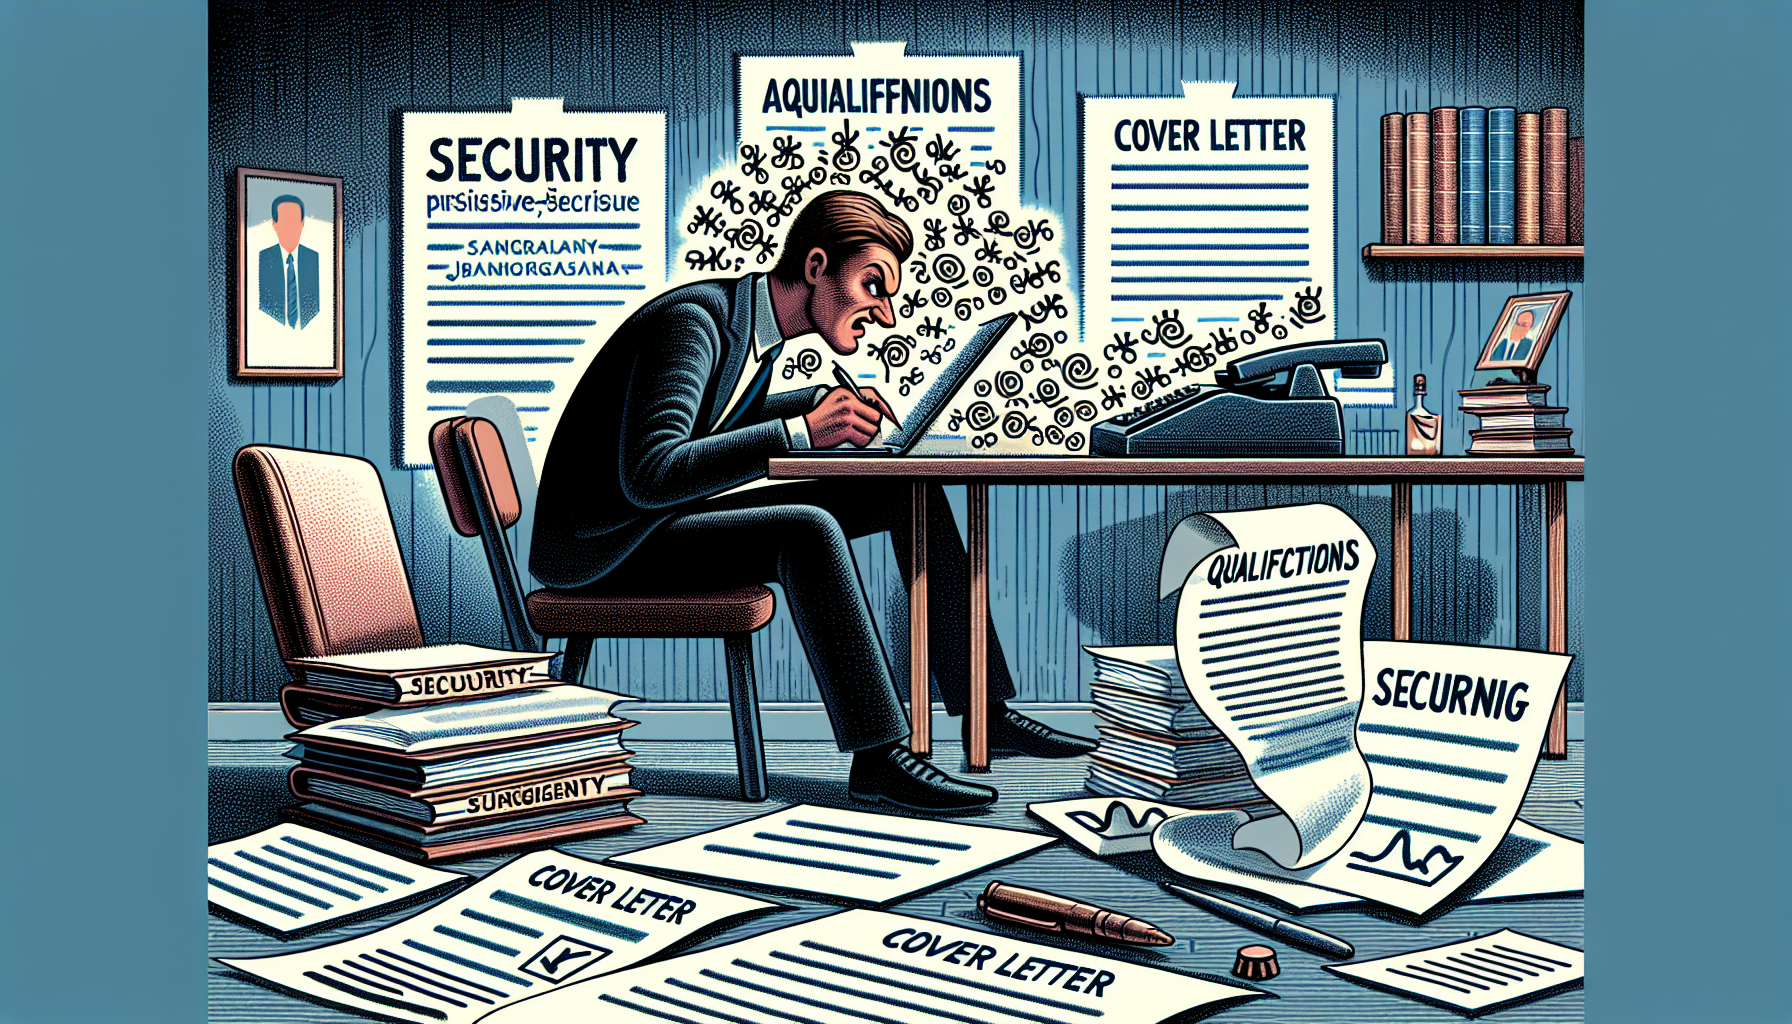 Illustration of a person crafting a persuasive security job application